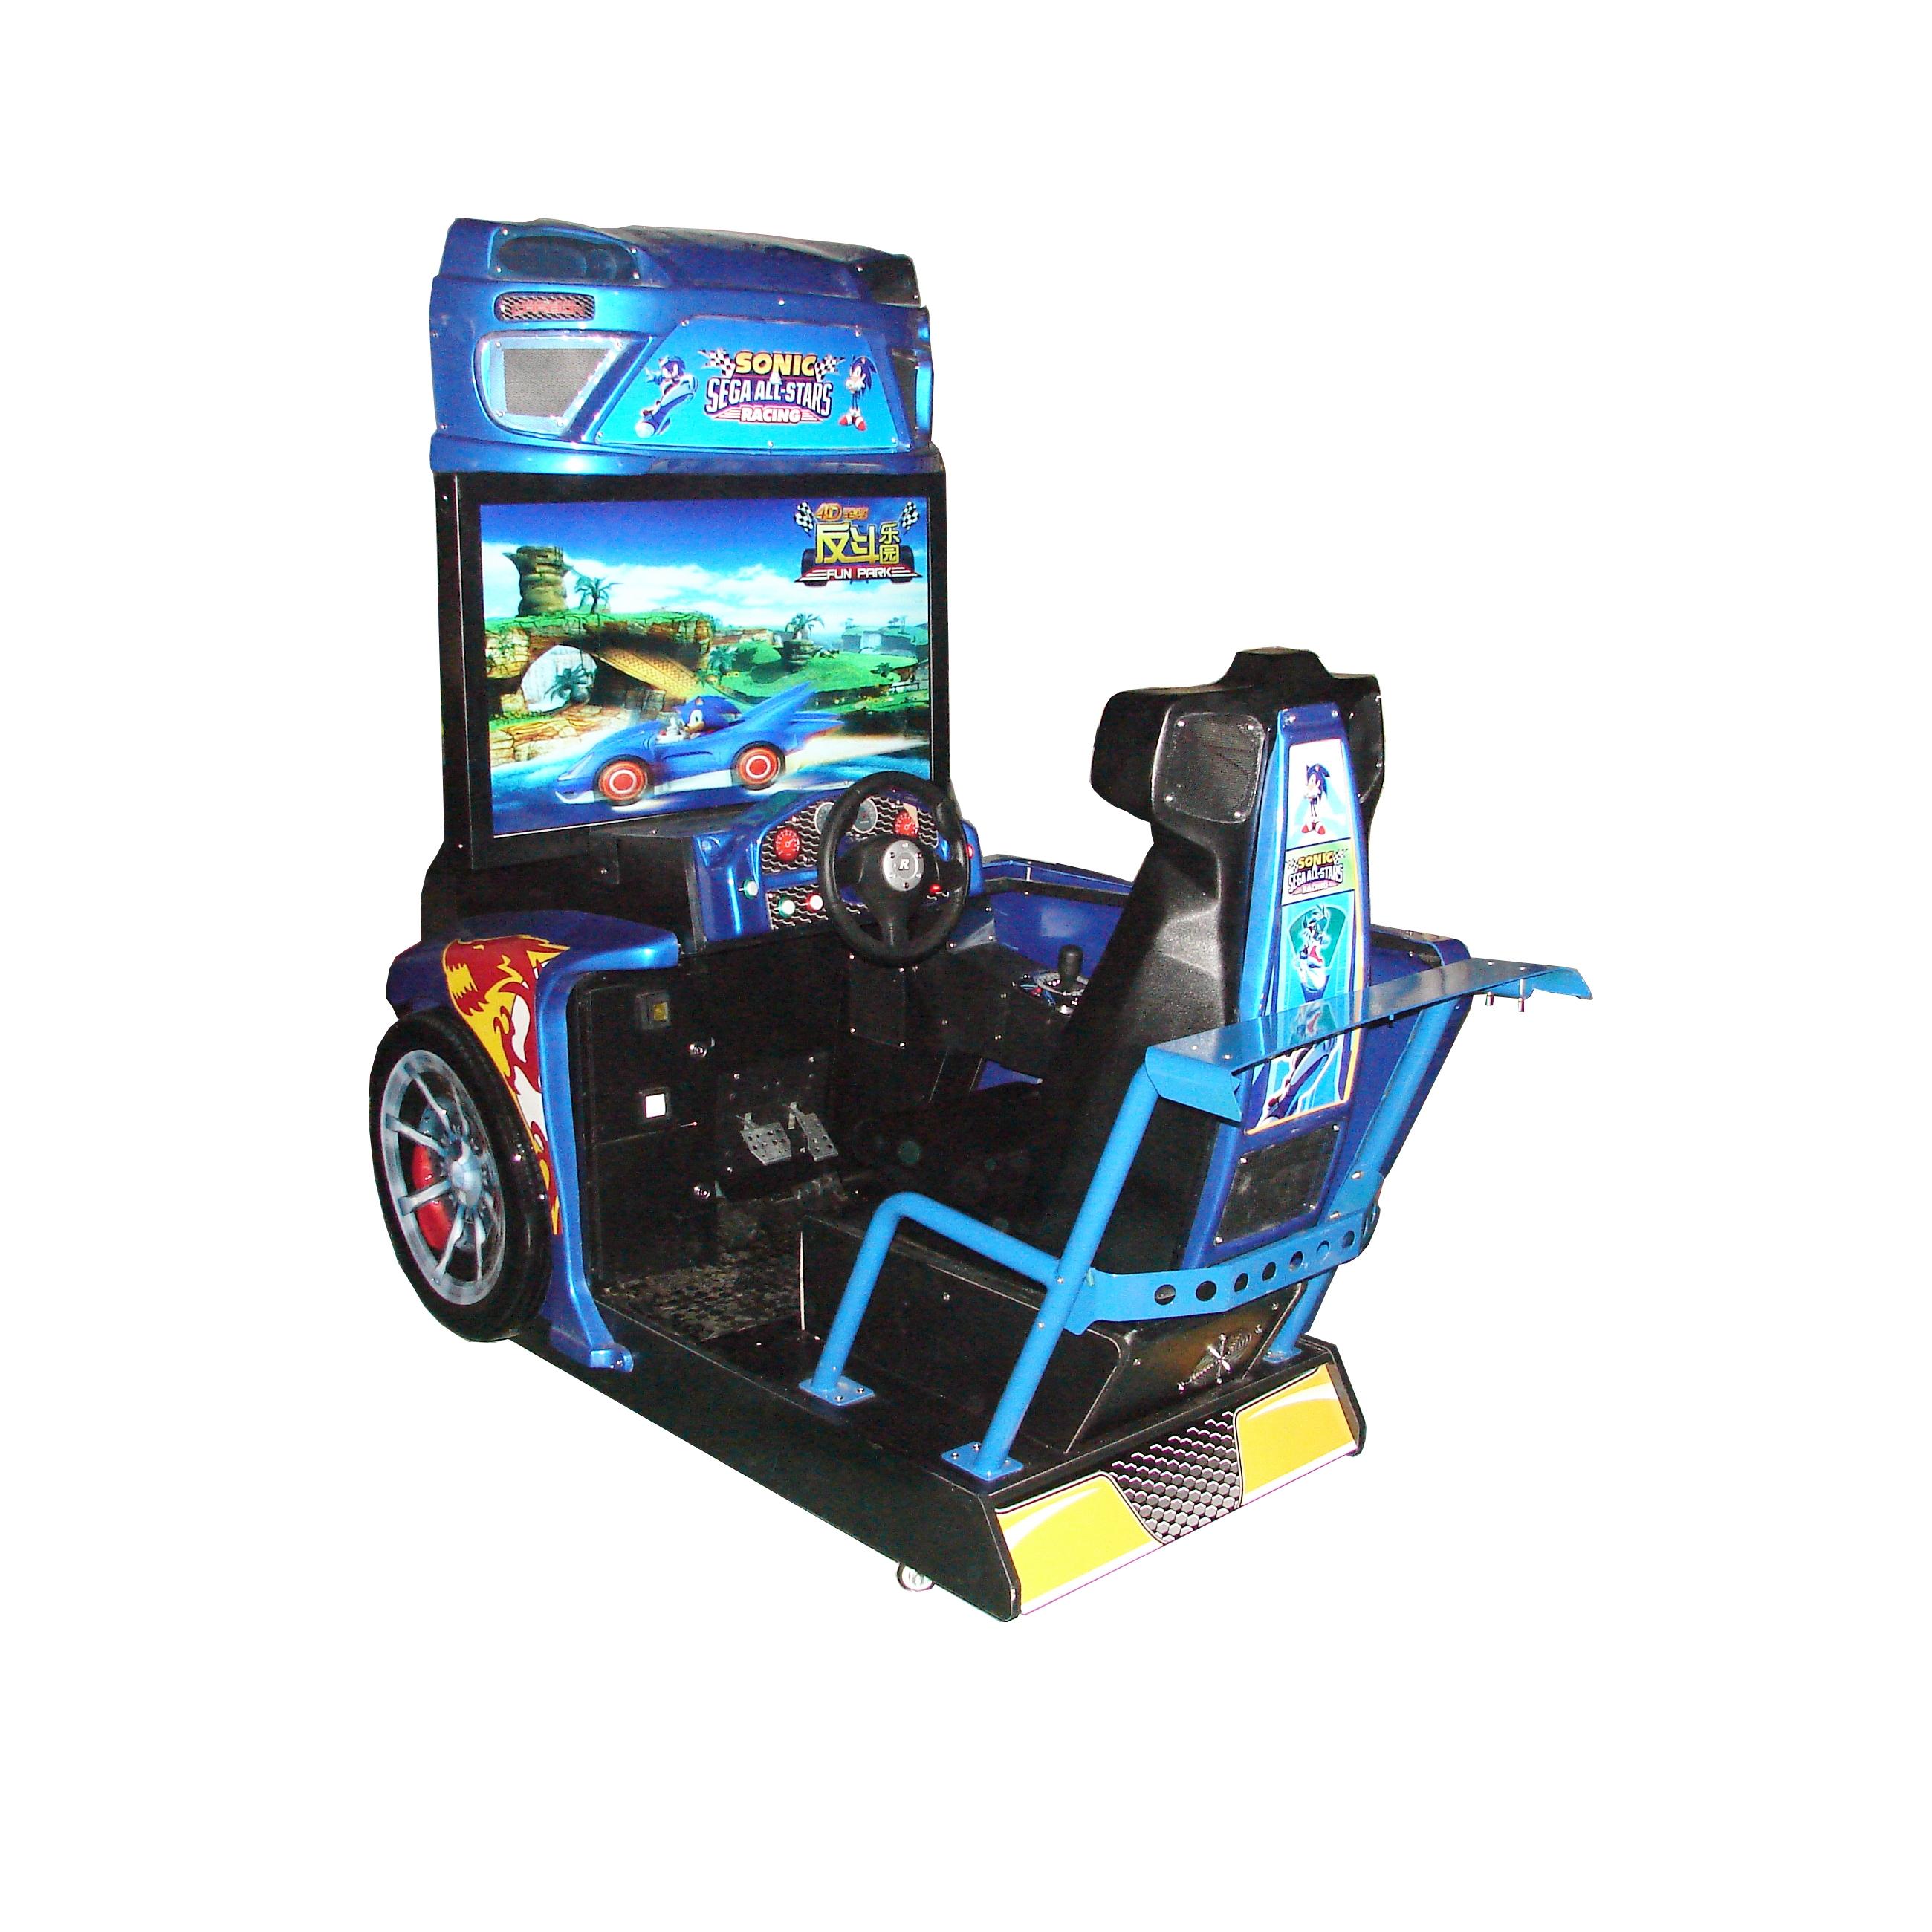 Hotselling 42"Sonic Racing simulator racing arcade game machine for game center